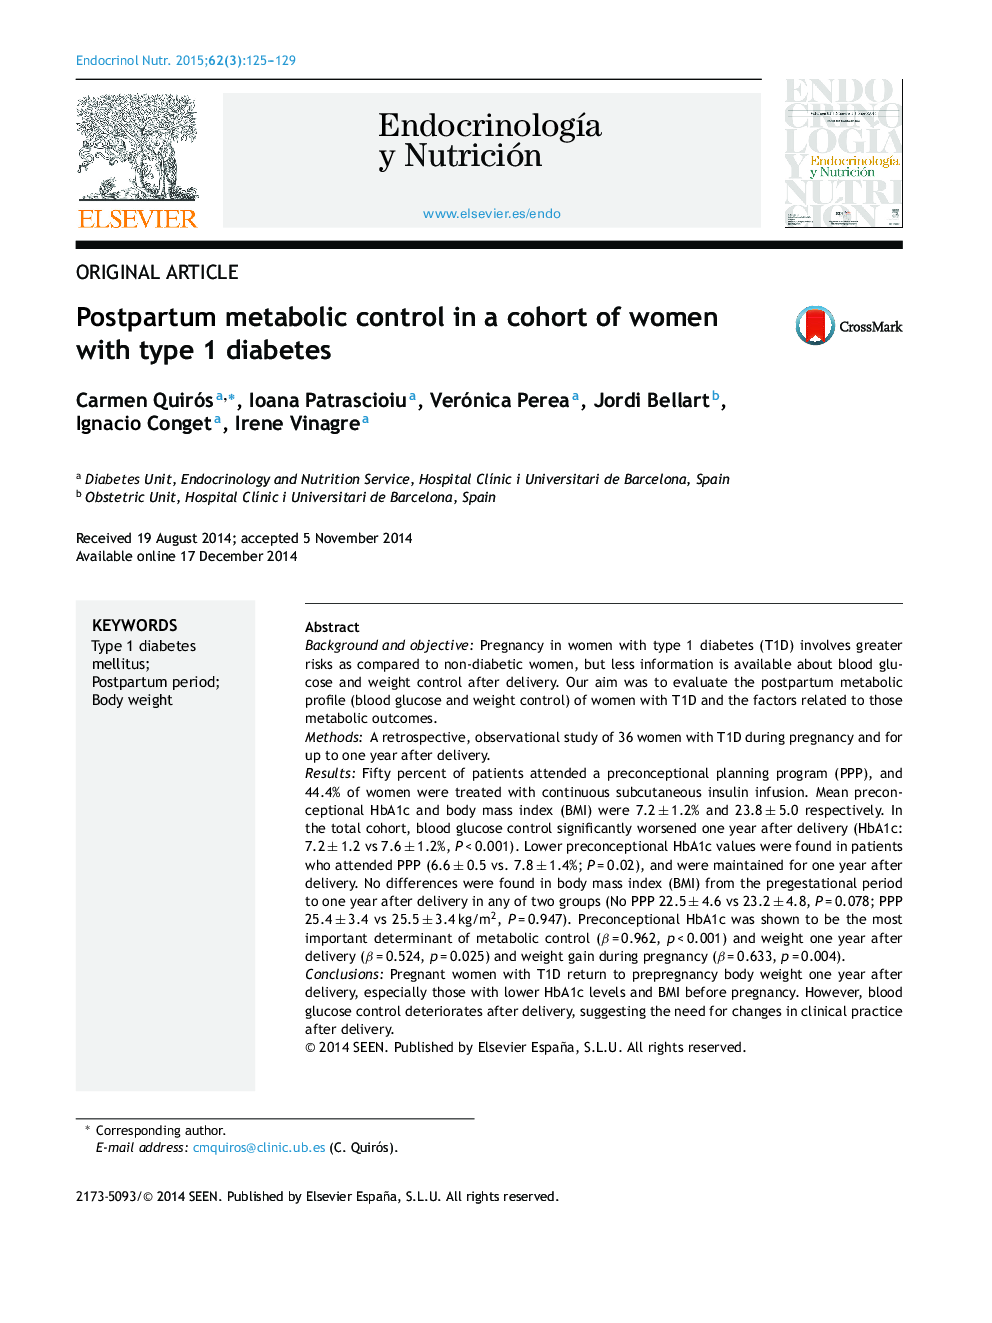 Postpartum metabolic control in a cohort of women with type 1 diabetes